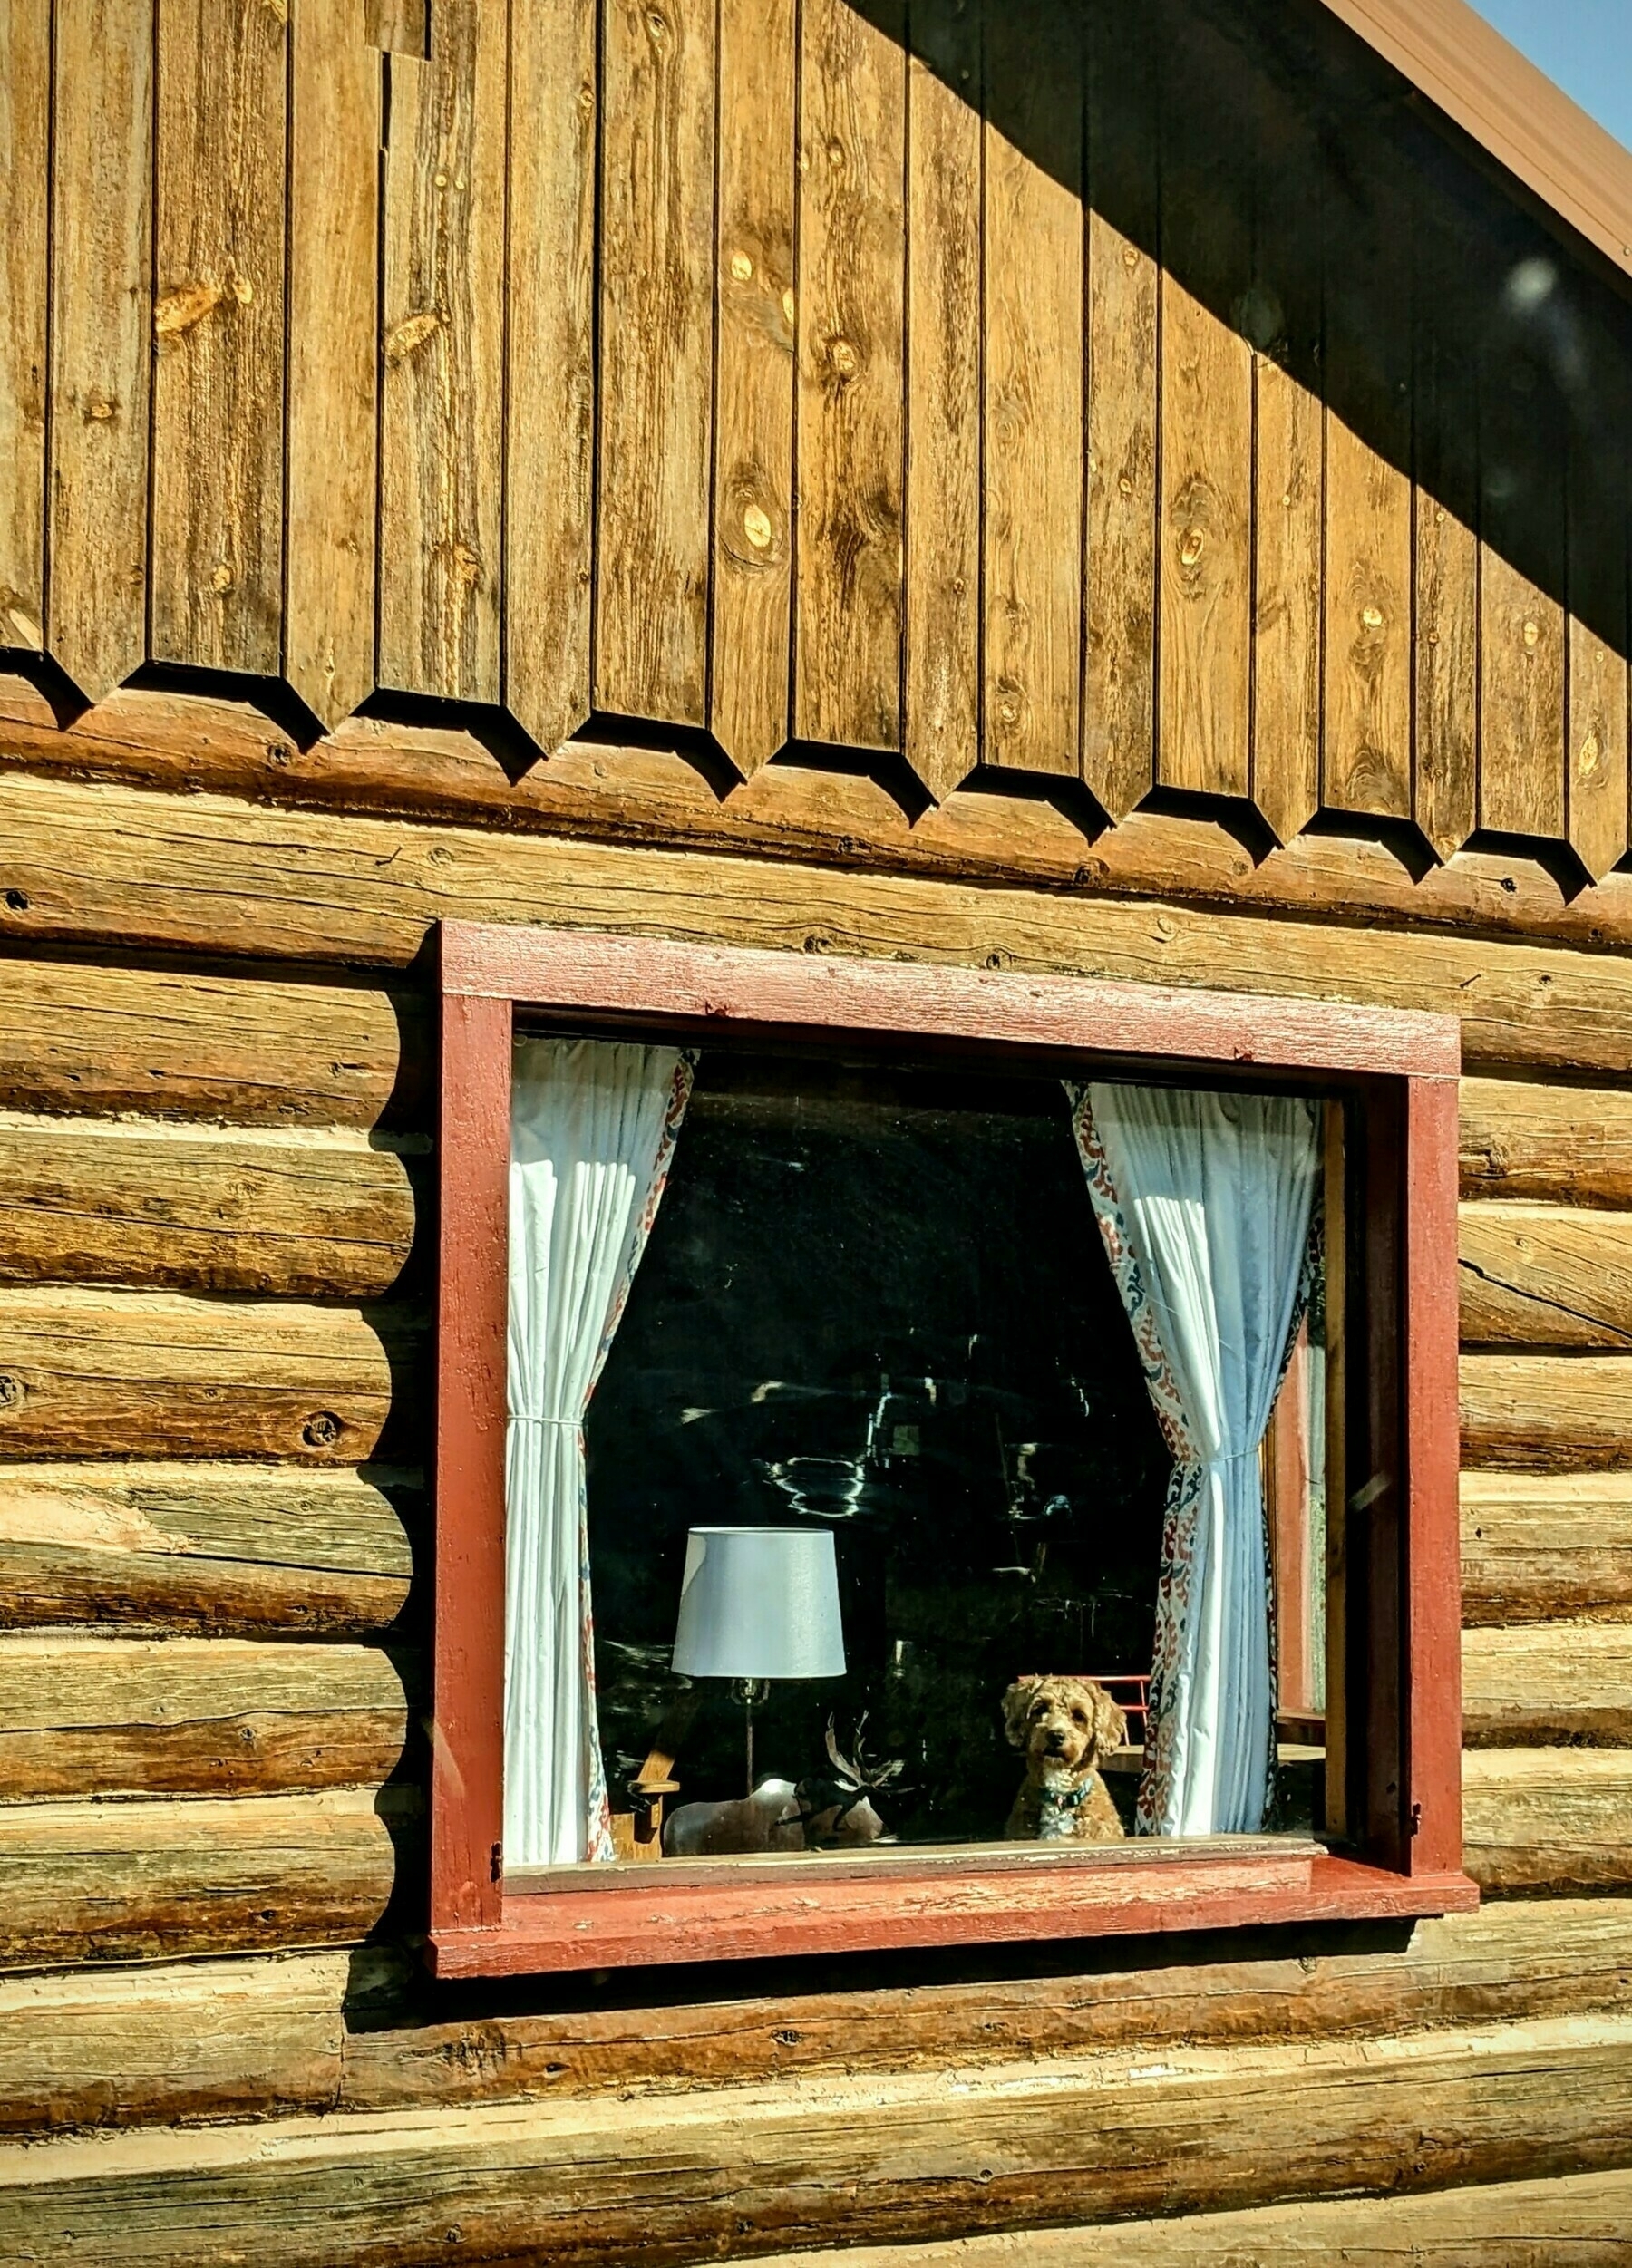 A dog watching out of the window of a log cabin